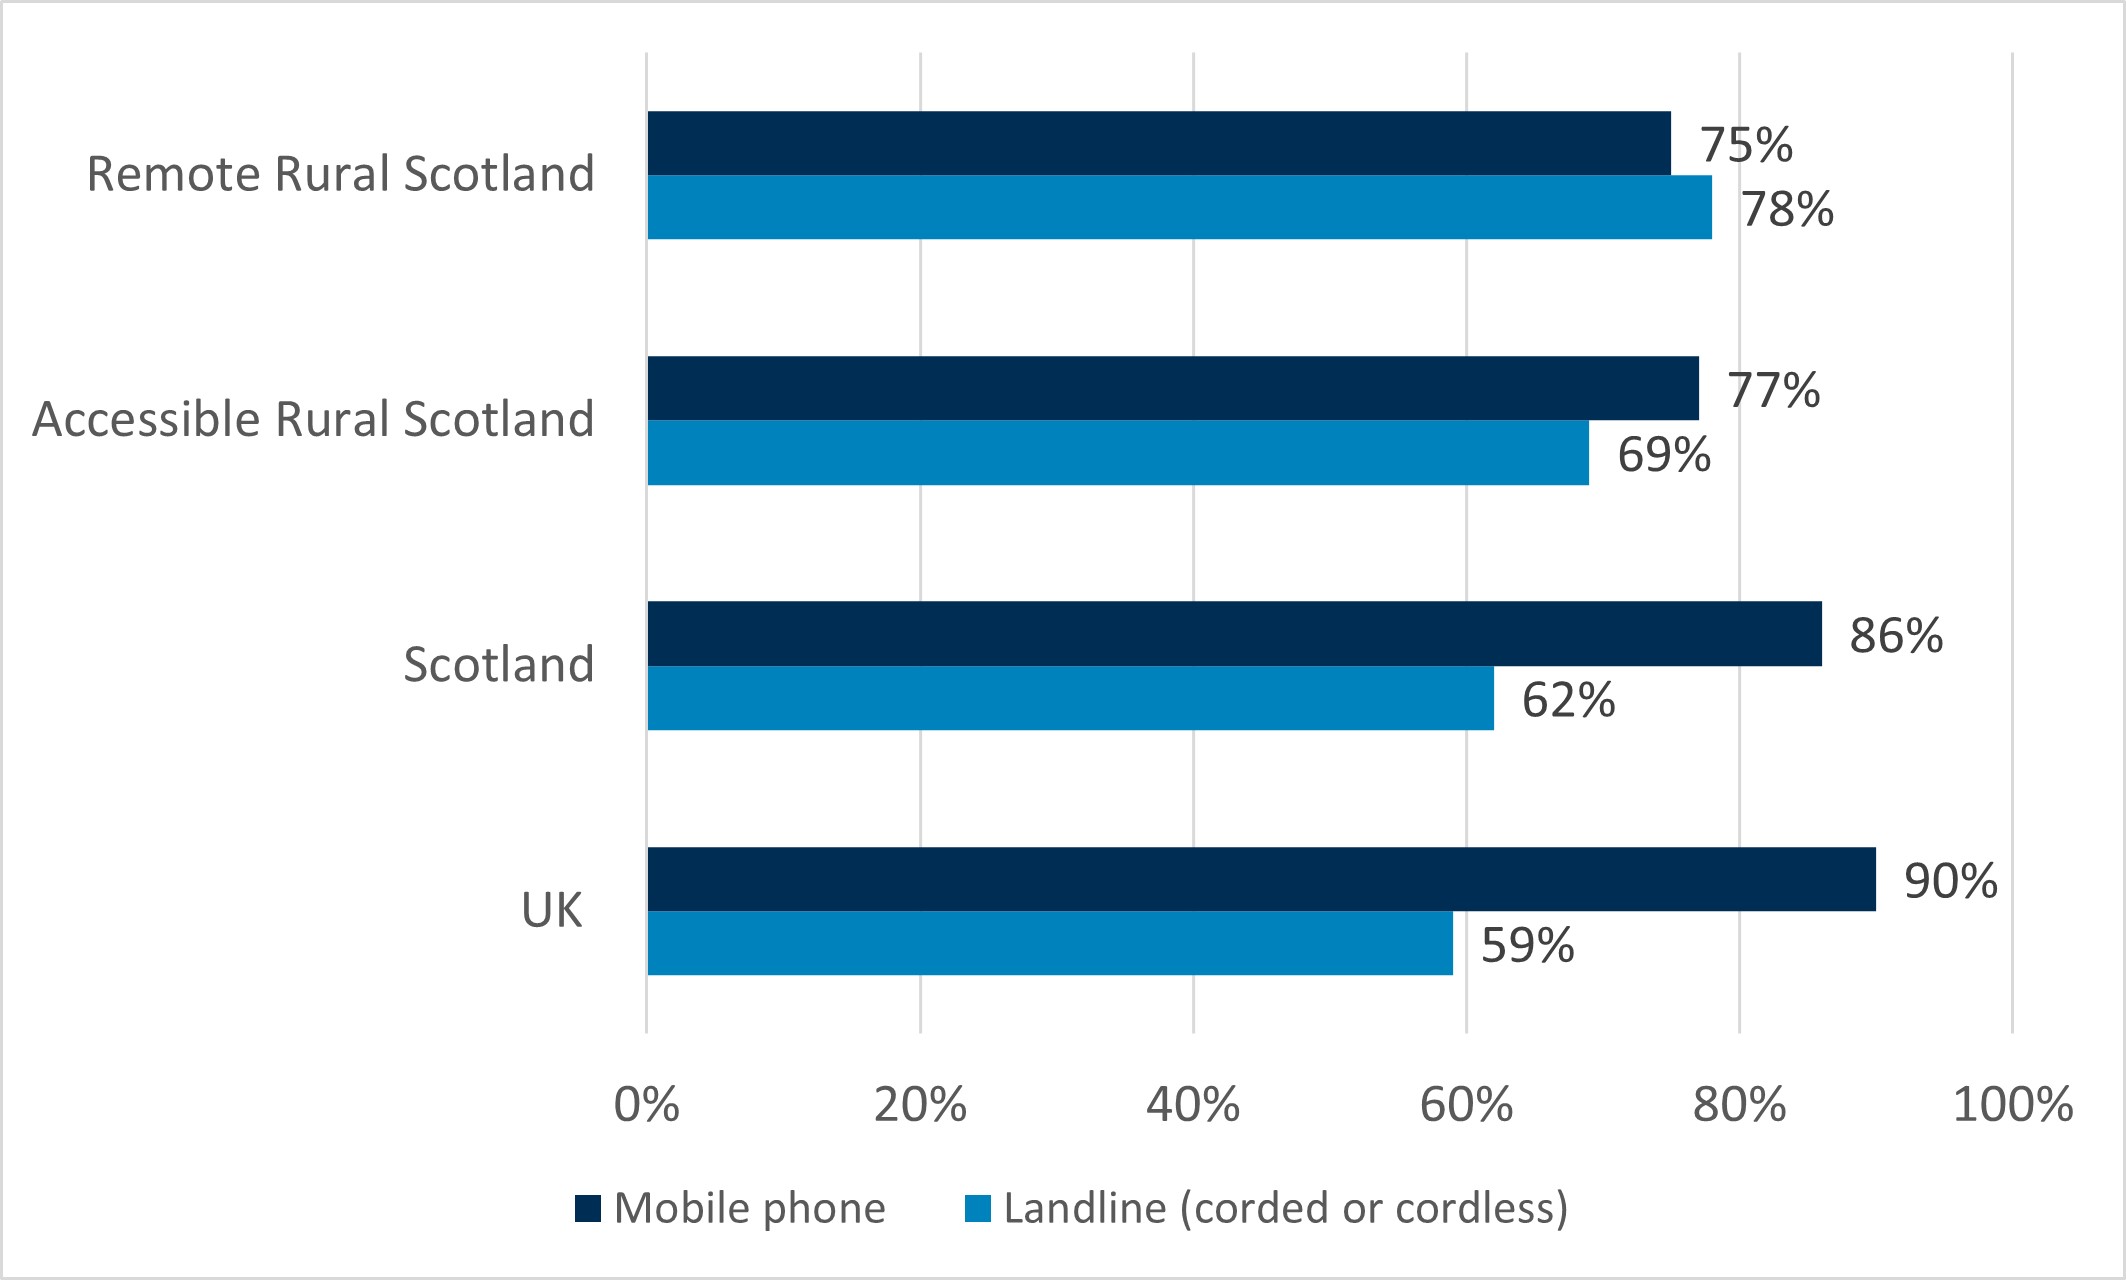 A chart that shows the percentage of respondents in the UK, Scotland, accessible rural Scotland and remote rural Scotland who report using a mobile phone and a landline to make calls from home.